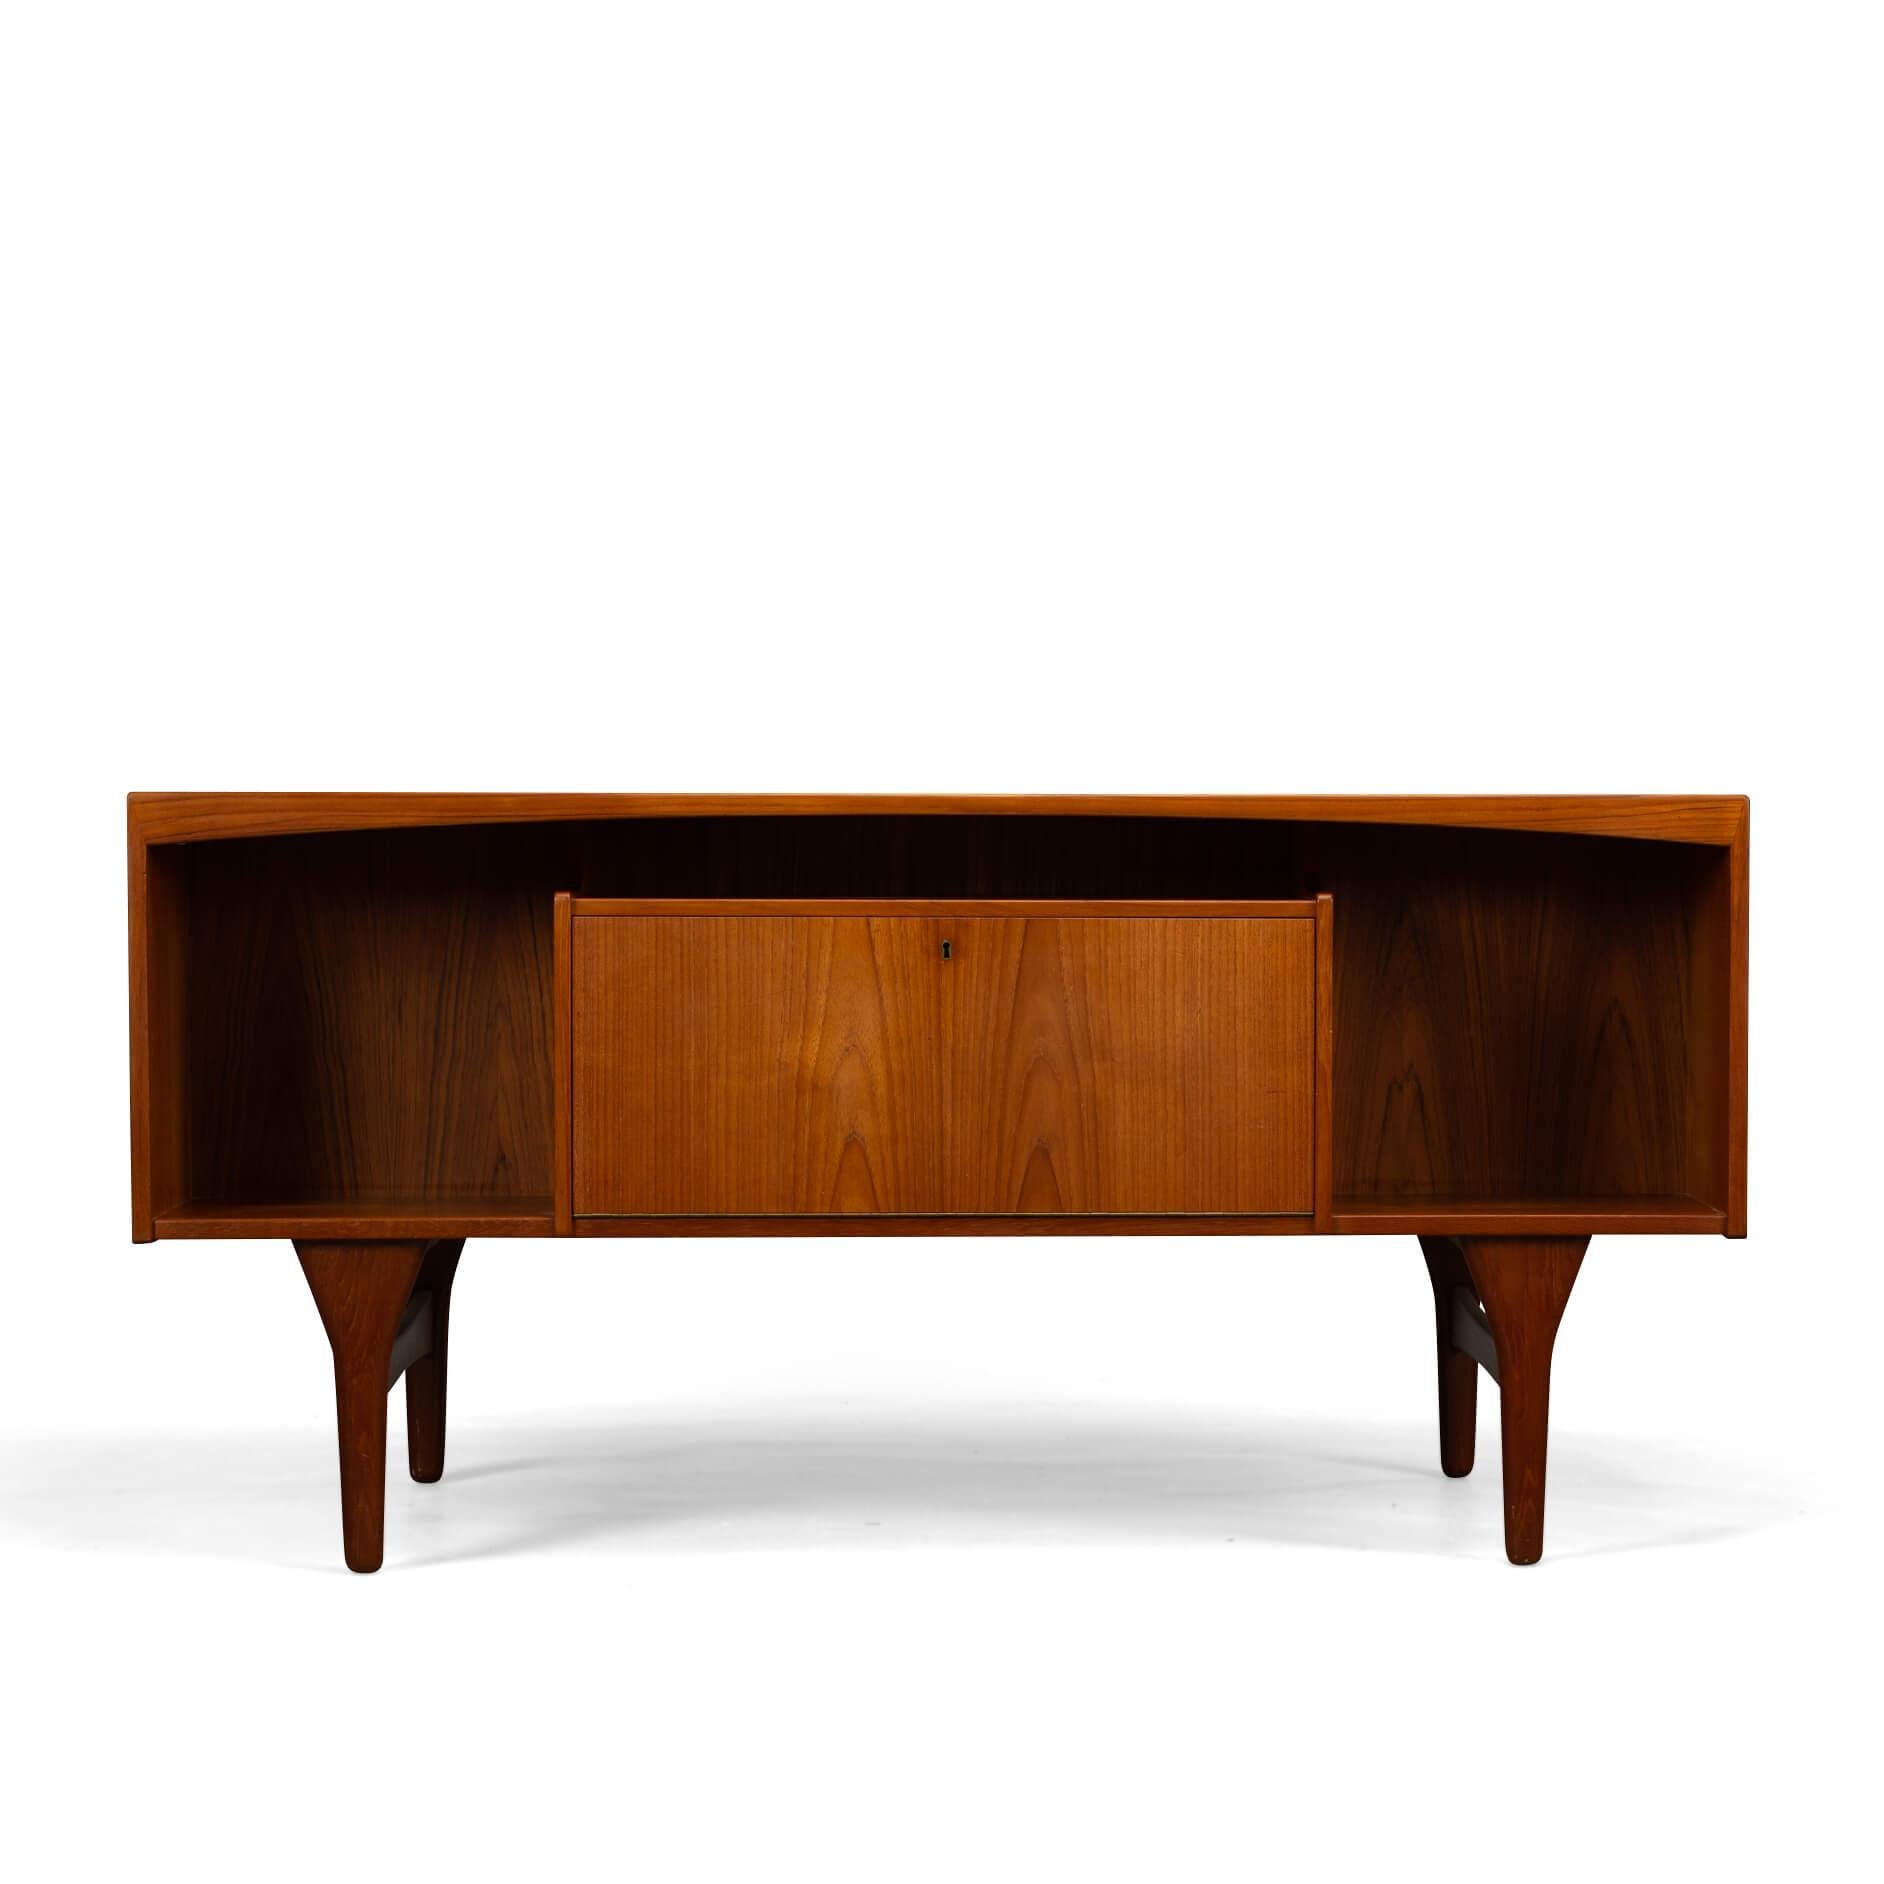 Design desk Fantastic freestanding sunburst teak desk designed and made by Valdemar Mortensen in the 1960s. It is a mid sized stylish midcentury desk in teak. Eclectic freestanding design with a semi floating top that is one with the drawer blocks